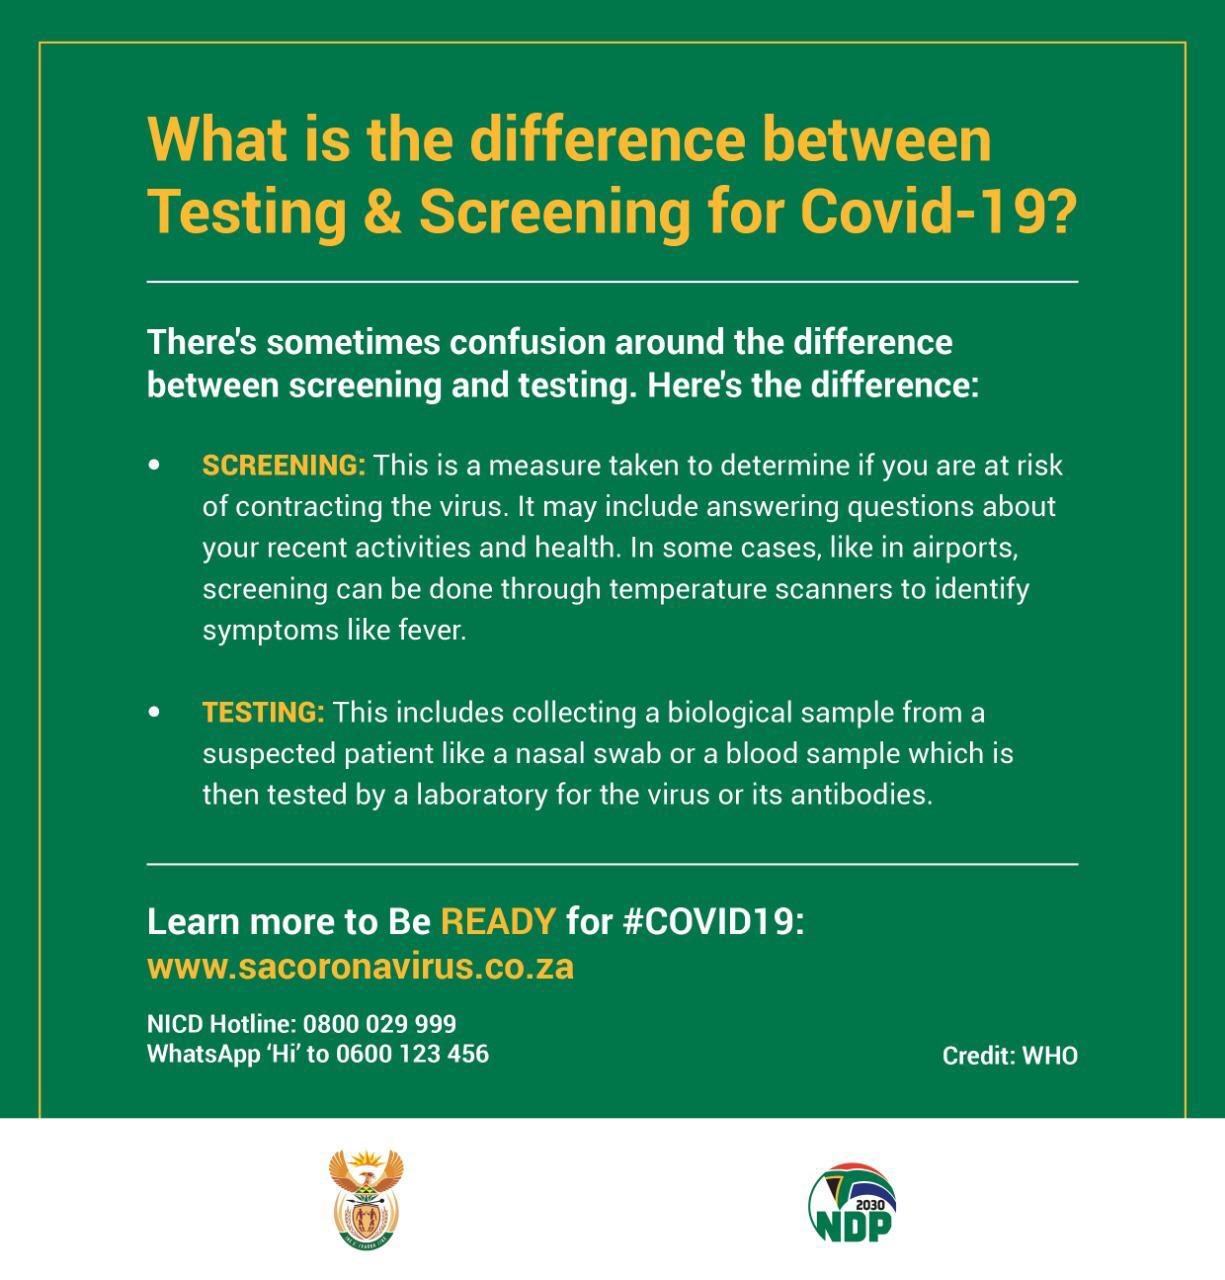 Social Media - COVID-19 Difference between testing and screening